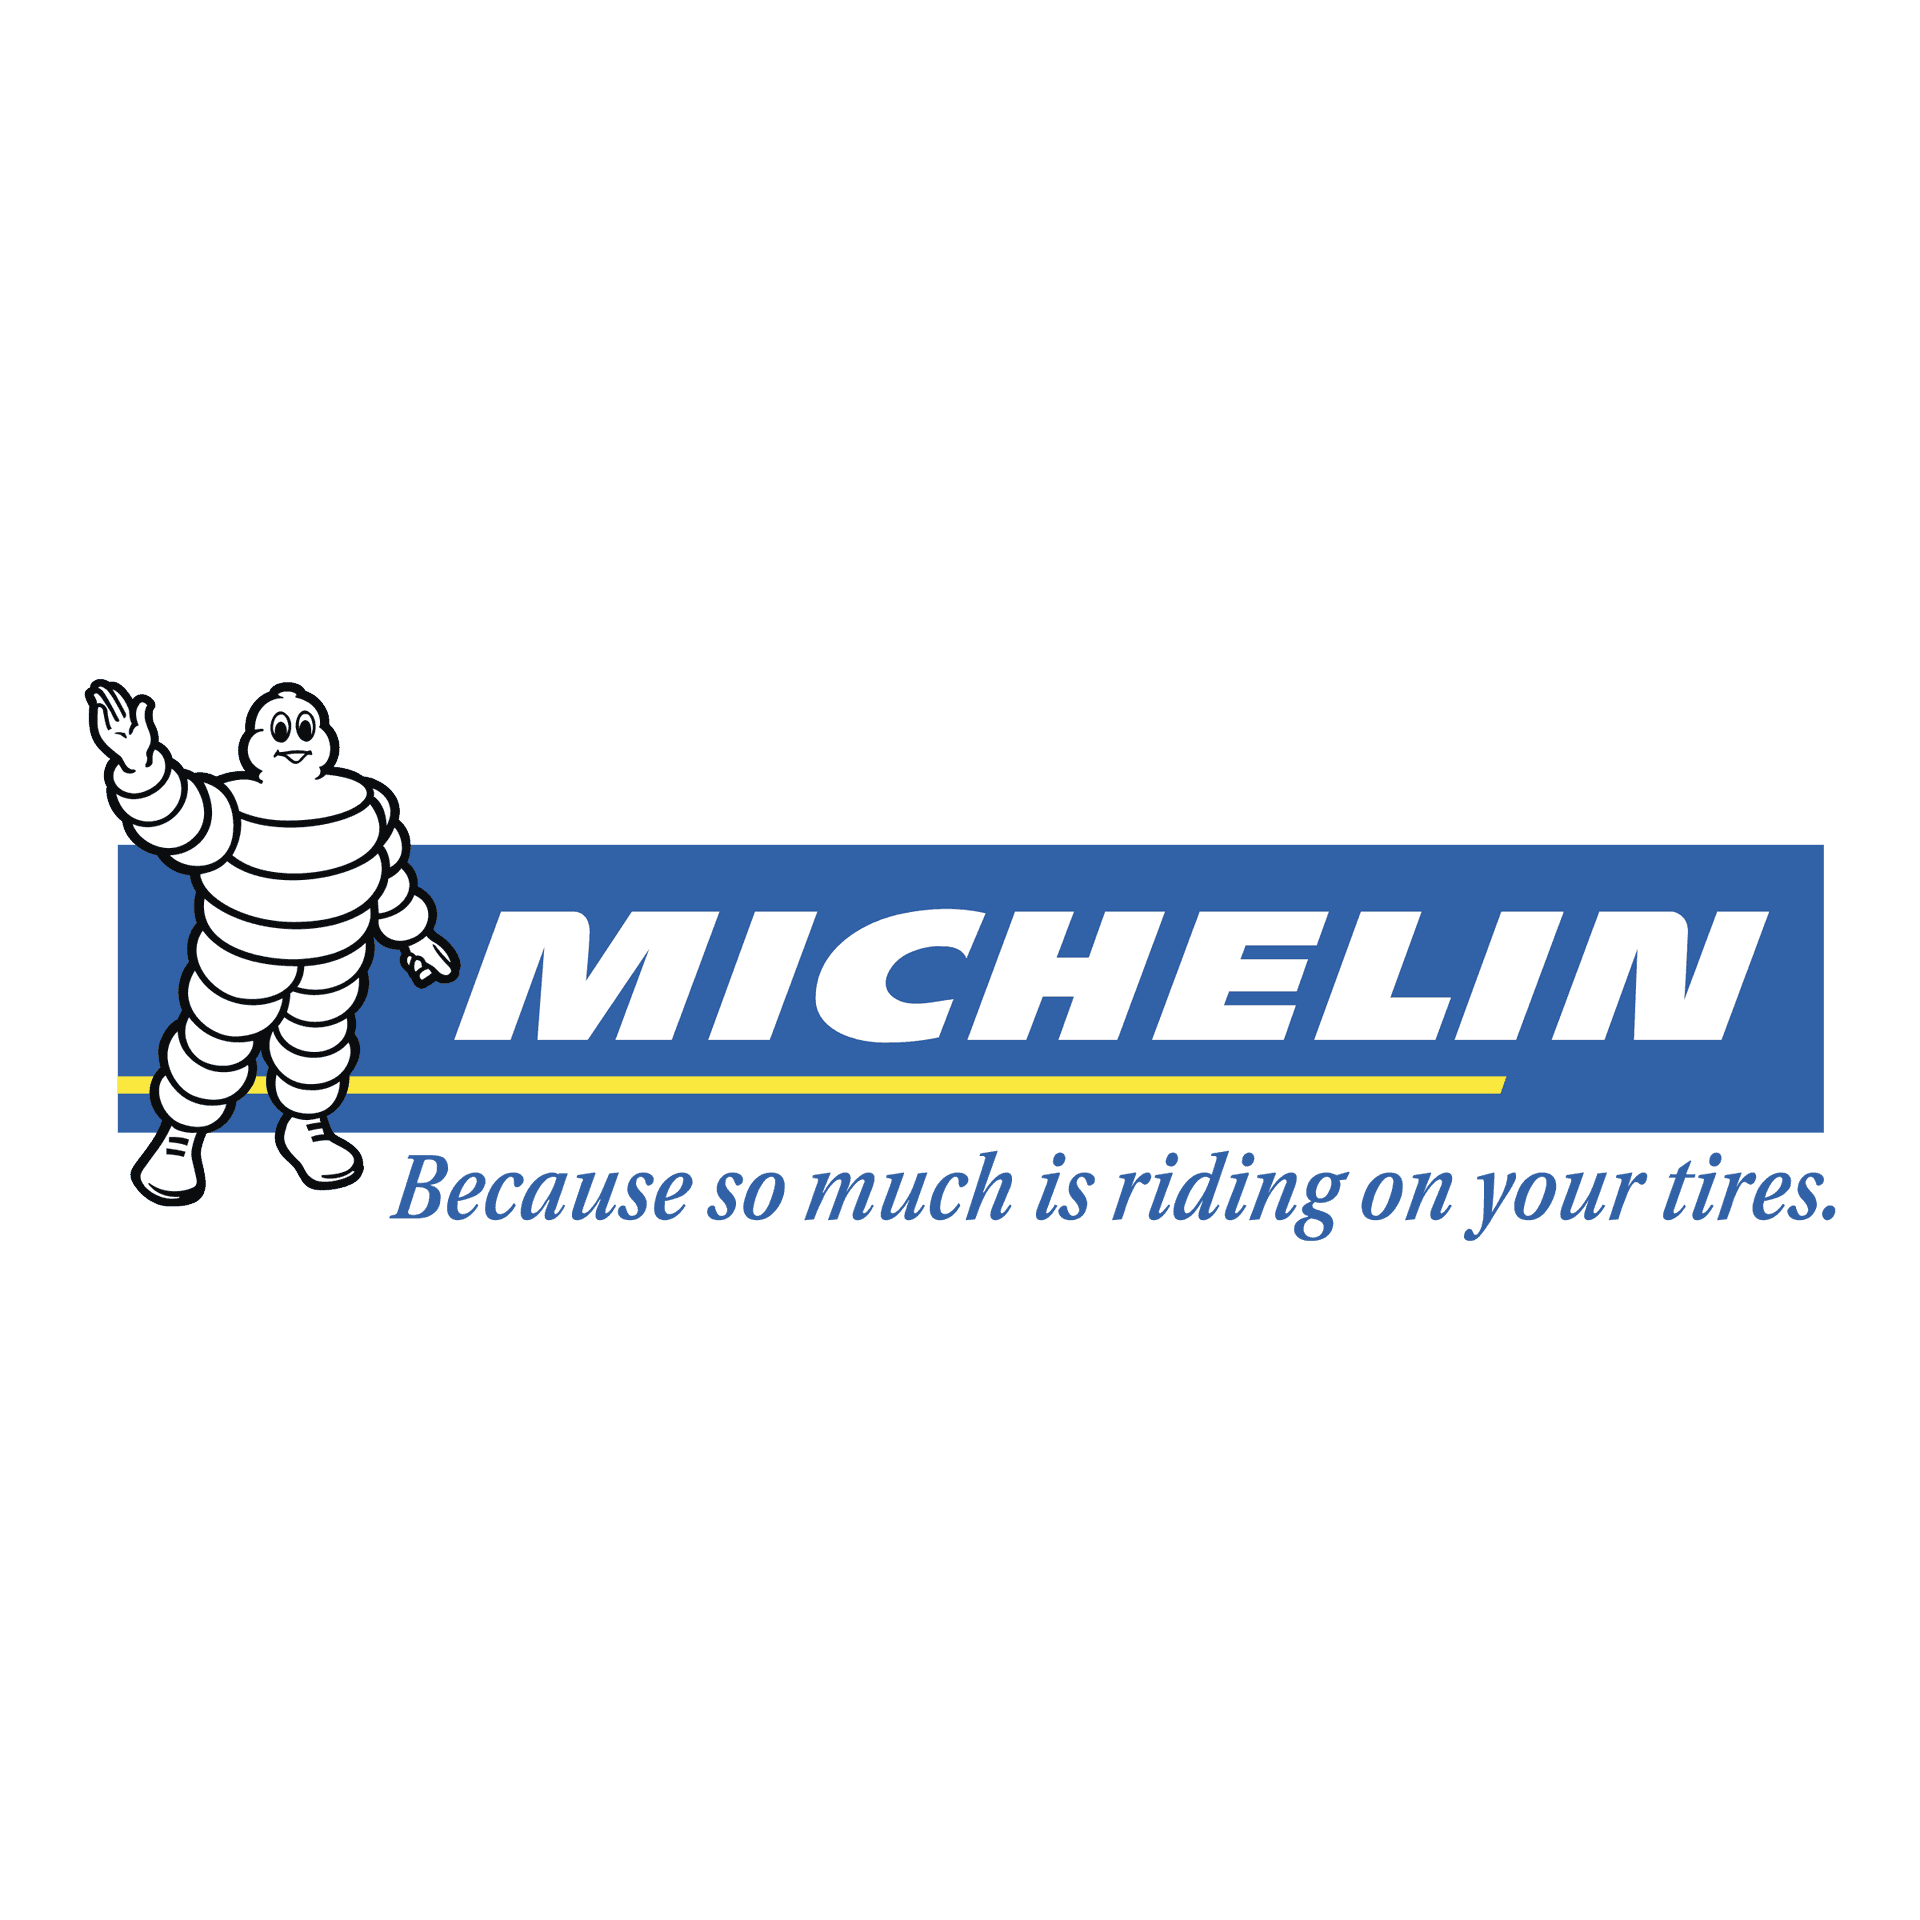 Michelin Logowith Mascotand Slogan PNG